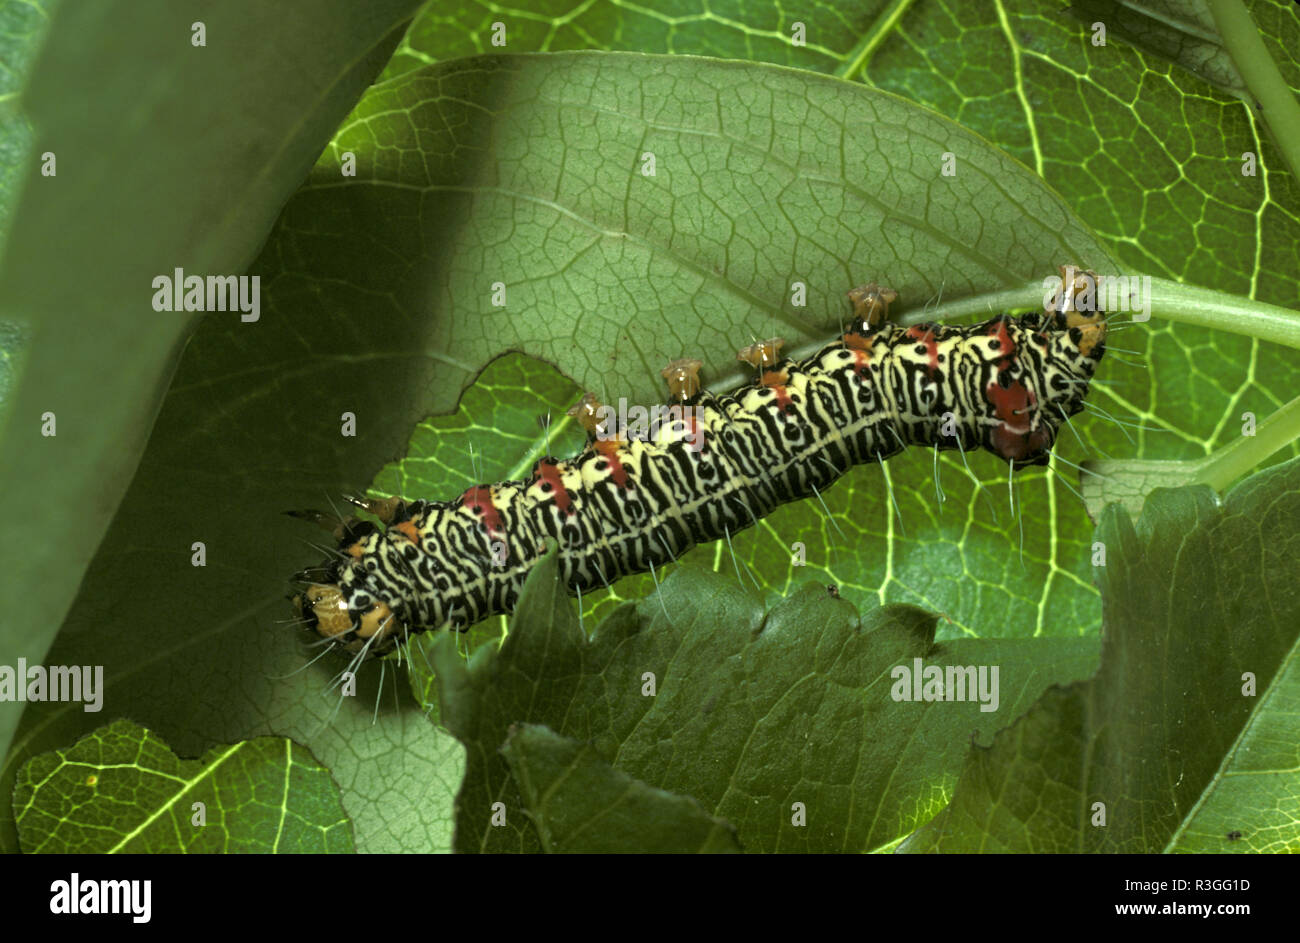 CATERPILLAR OF THE GRAPEVINE MOTH WHICH FEEDS MAINLY ON VINE LEAVES AND CAN BE VERY DESTRUCTIVE, AUSTRALIA Stock Photo